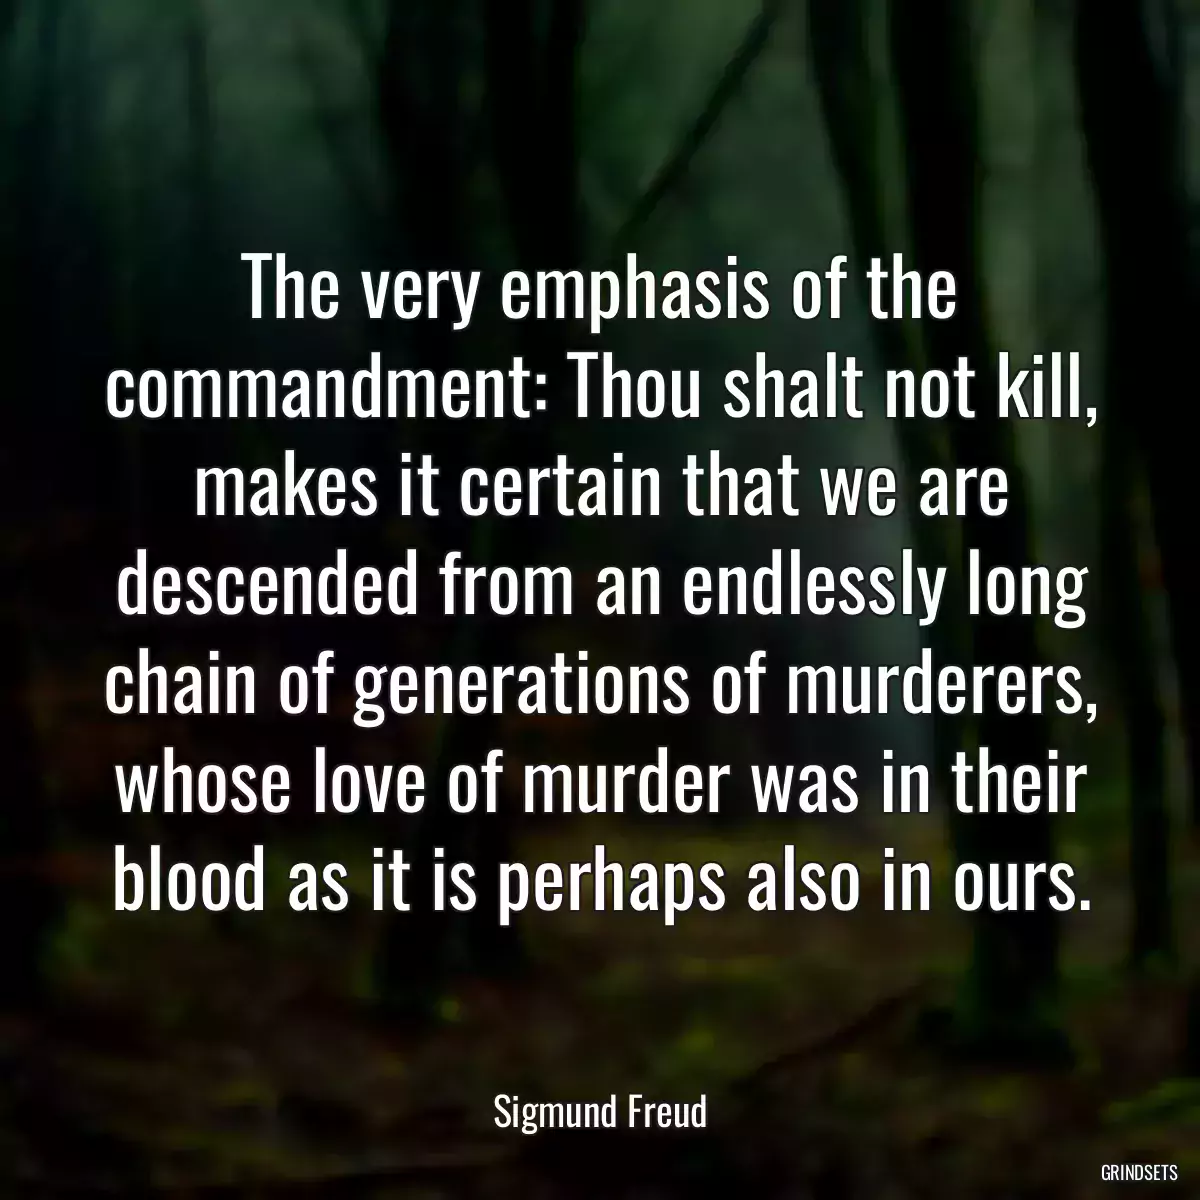 The very emphasis of the commandment: Thou shalt not kill, makes it certain that we are descended from an endlessly long chain of generations of murderers, whose love of murder was in their blood as it is perhaps also in ours.